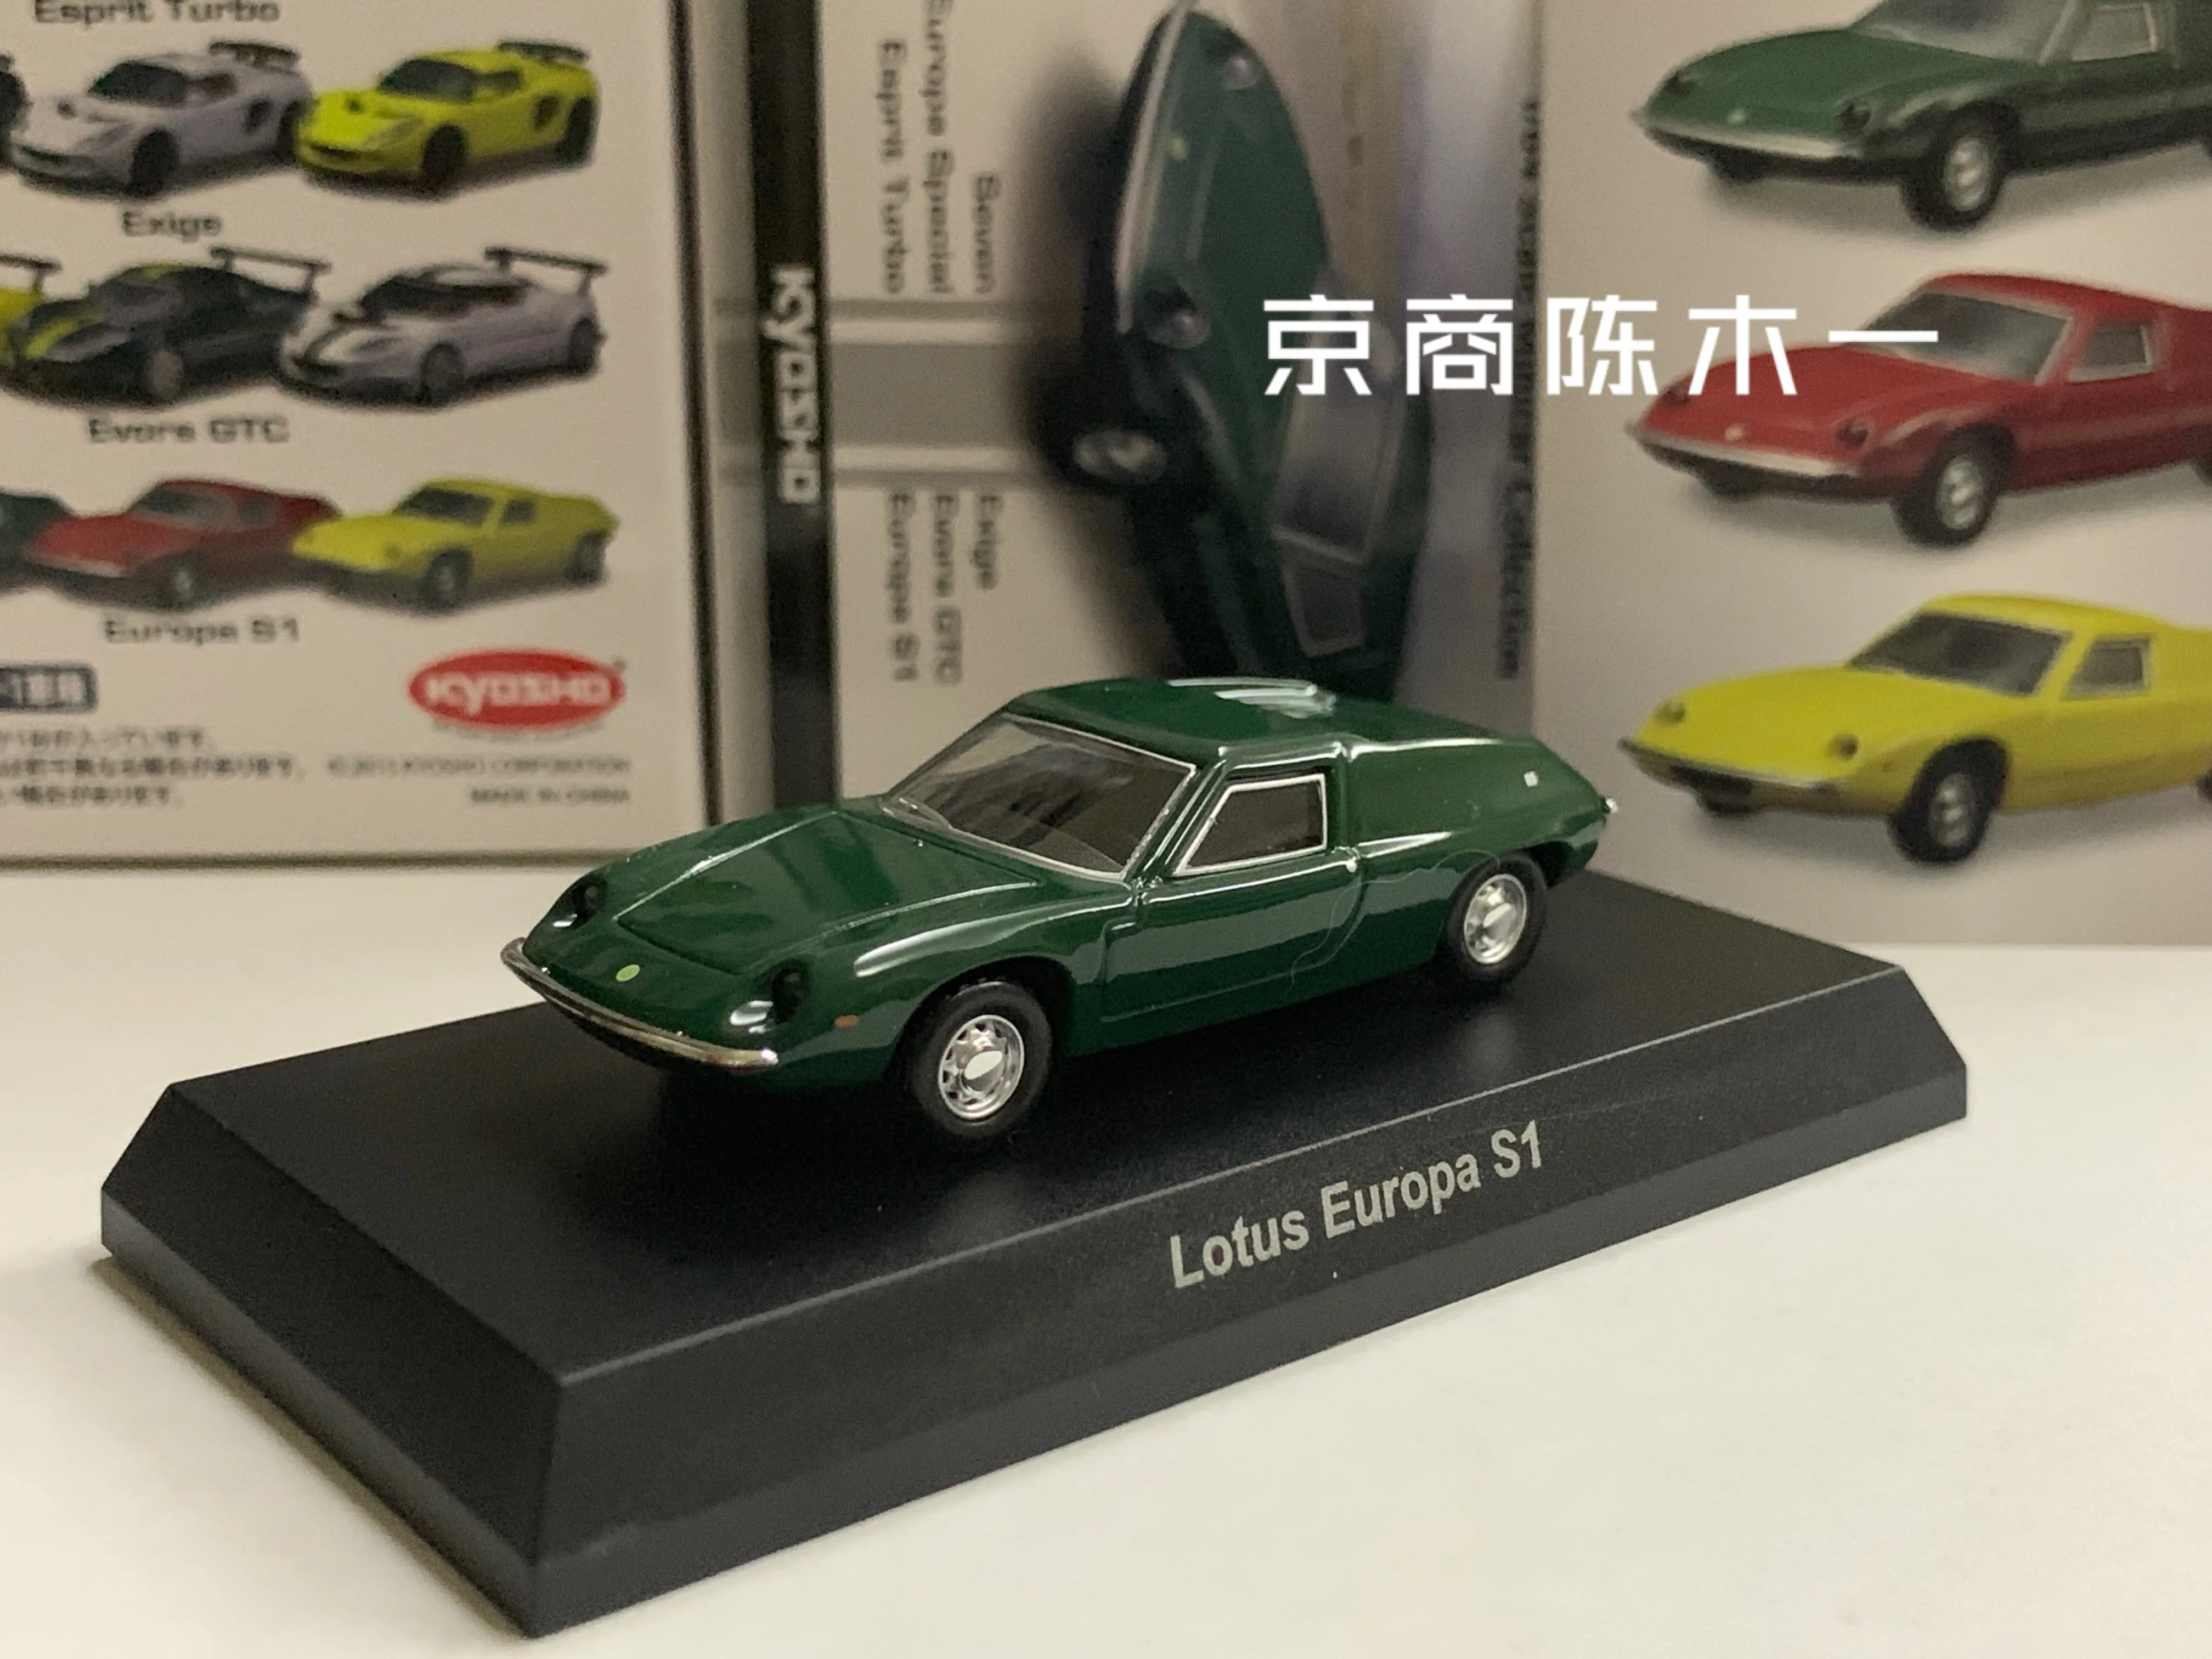 

1/64 KYOSHO Lotus Europa S1 Collection of die-cast alloy car decoration model toys